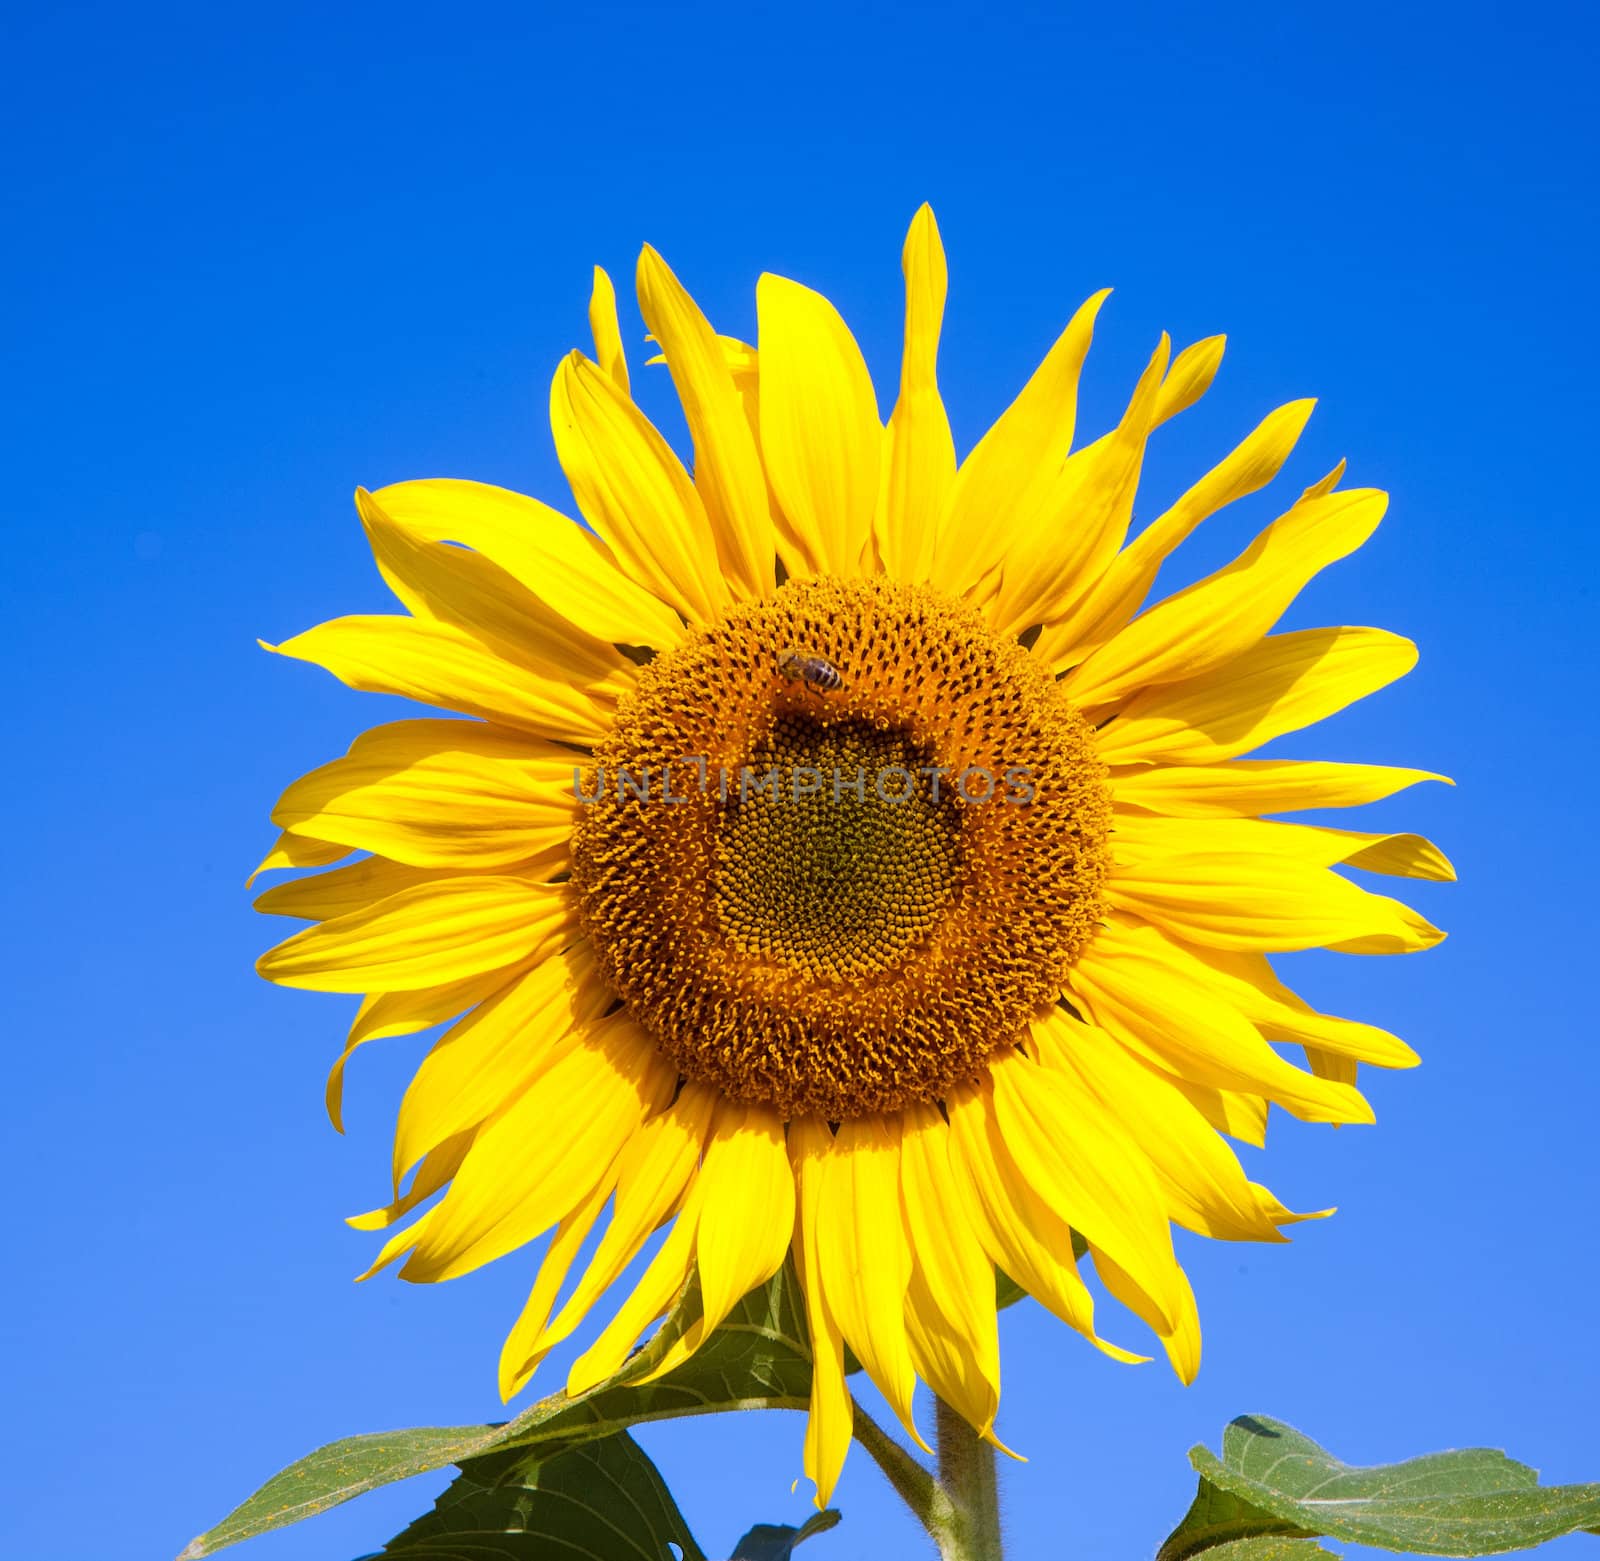 sunflower background with bee and blue sky